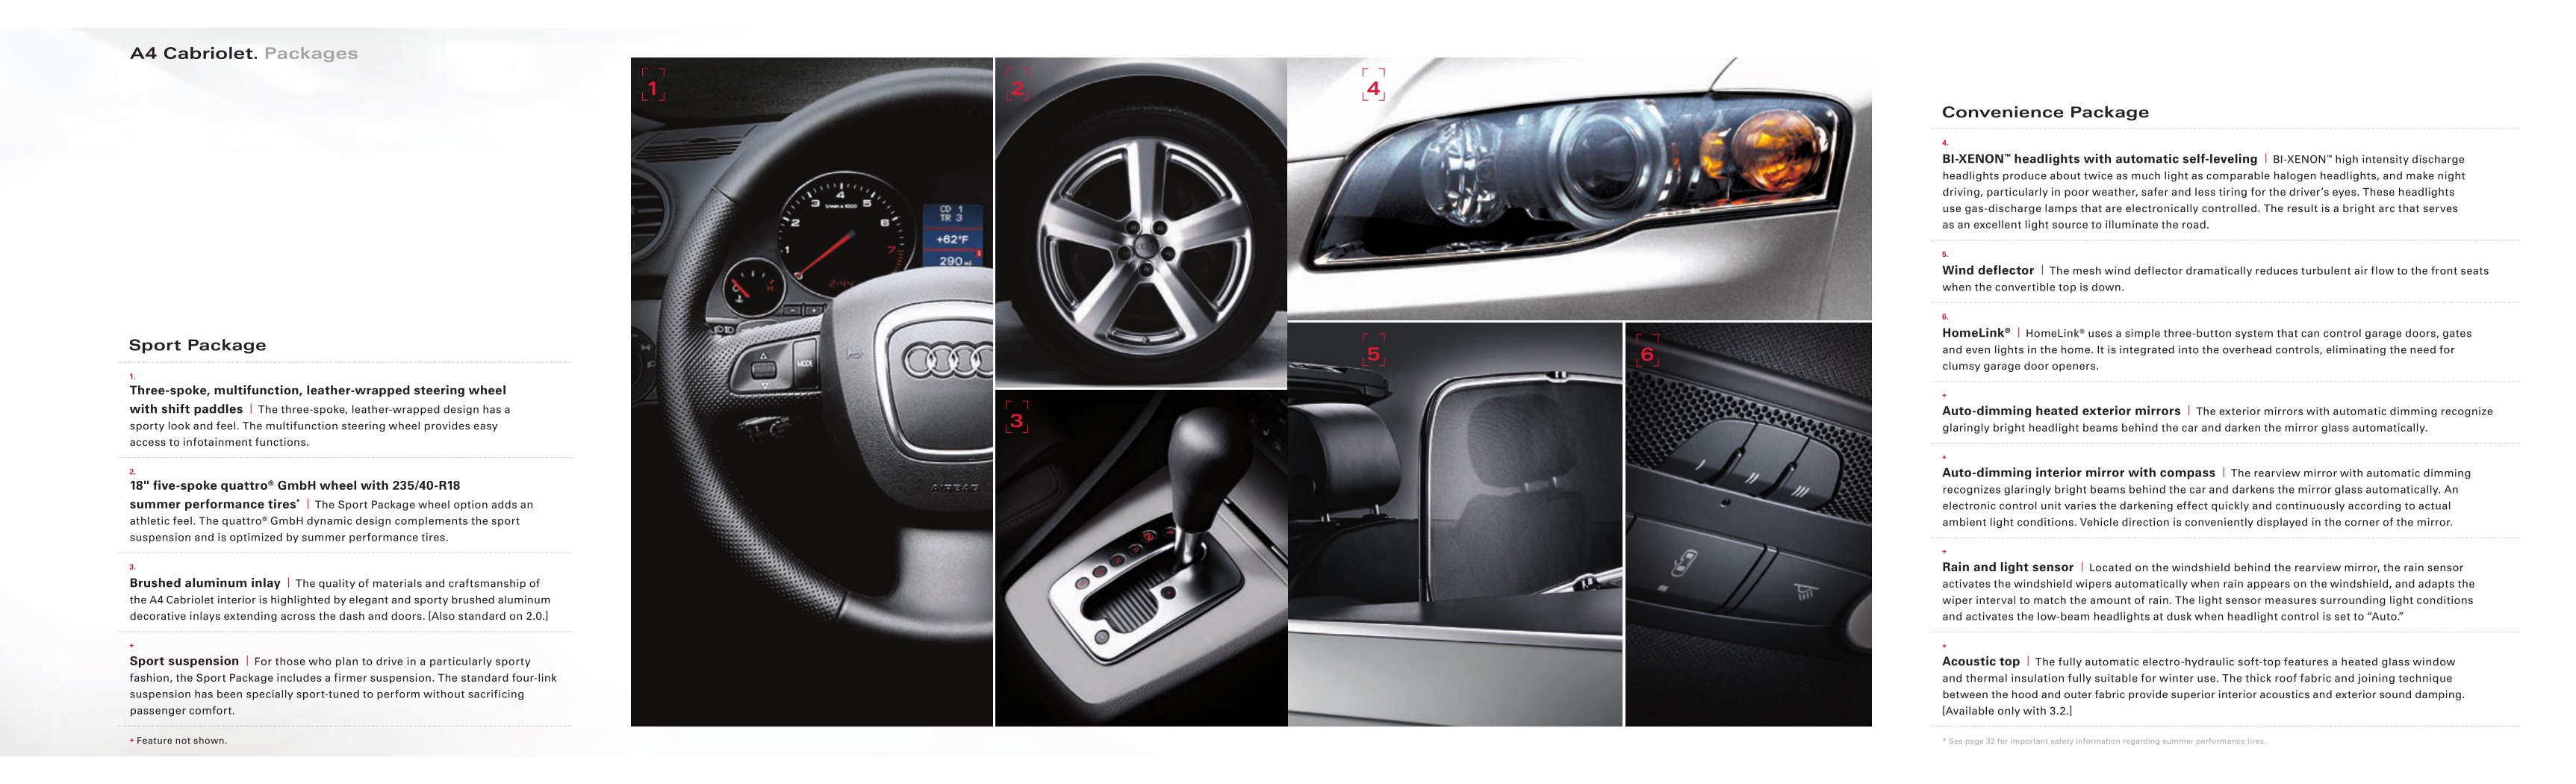 2009 Audi A4 Convertible Brochure Page 18